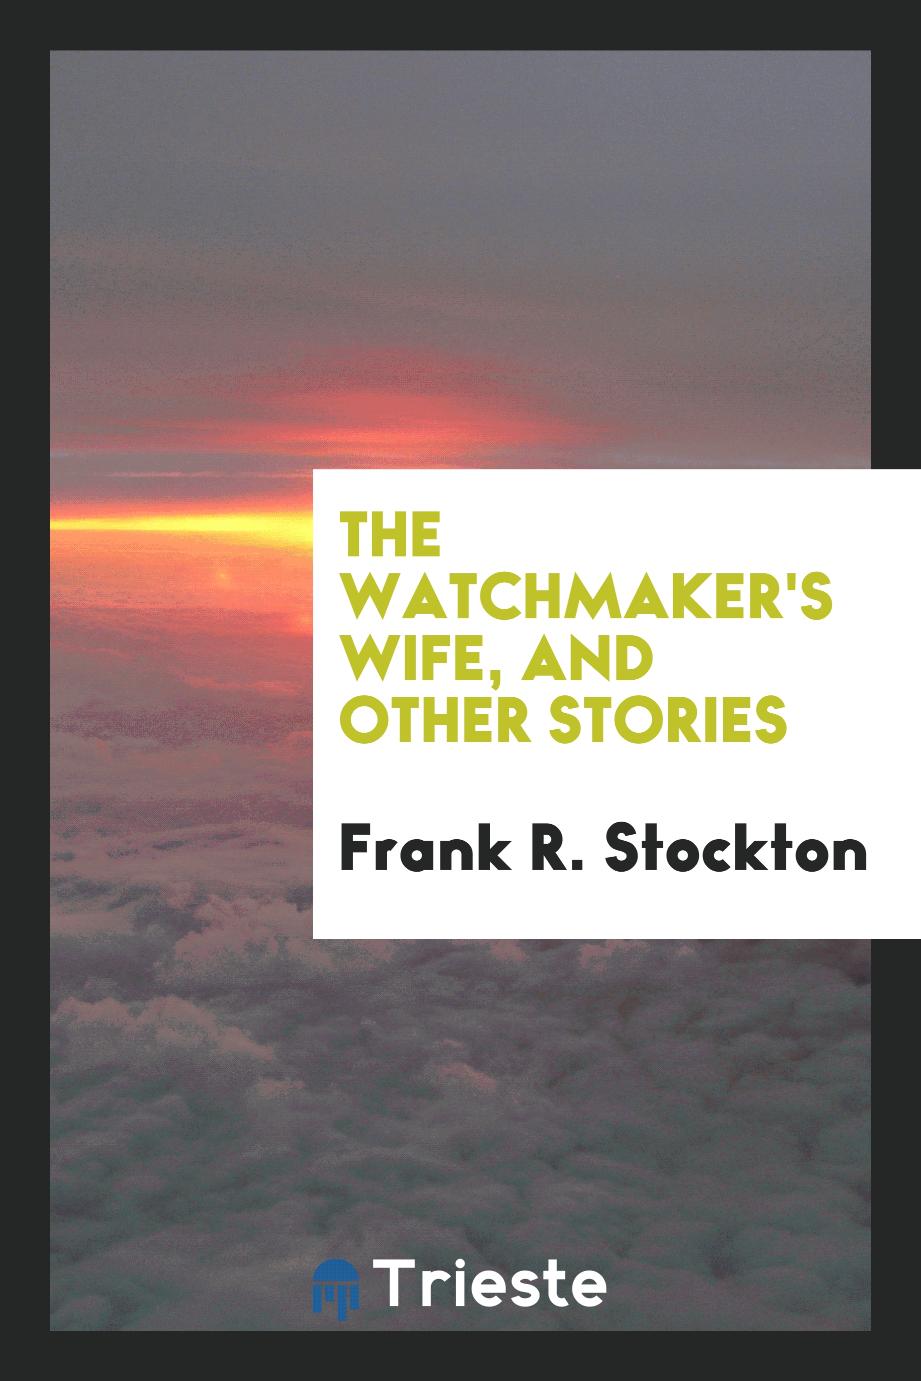 The watchmaker's wife, and other stories